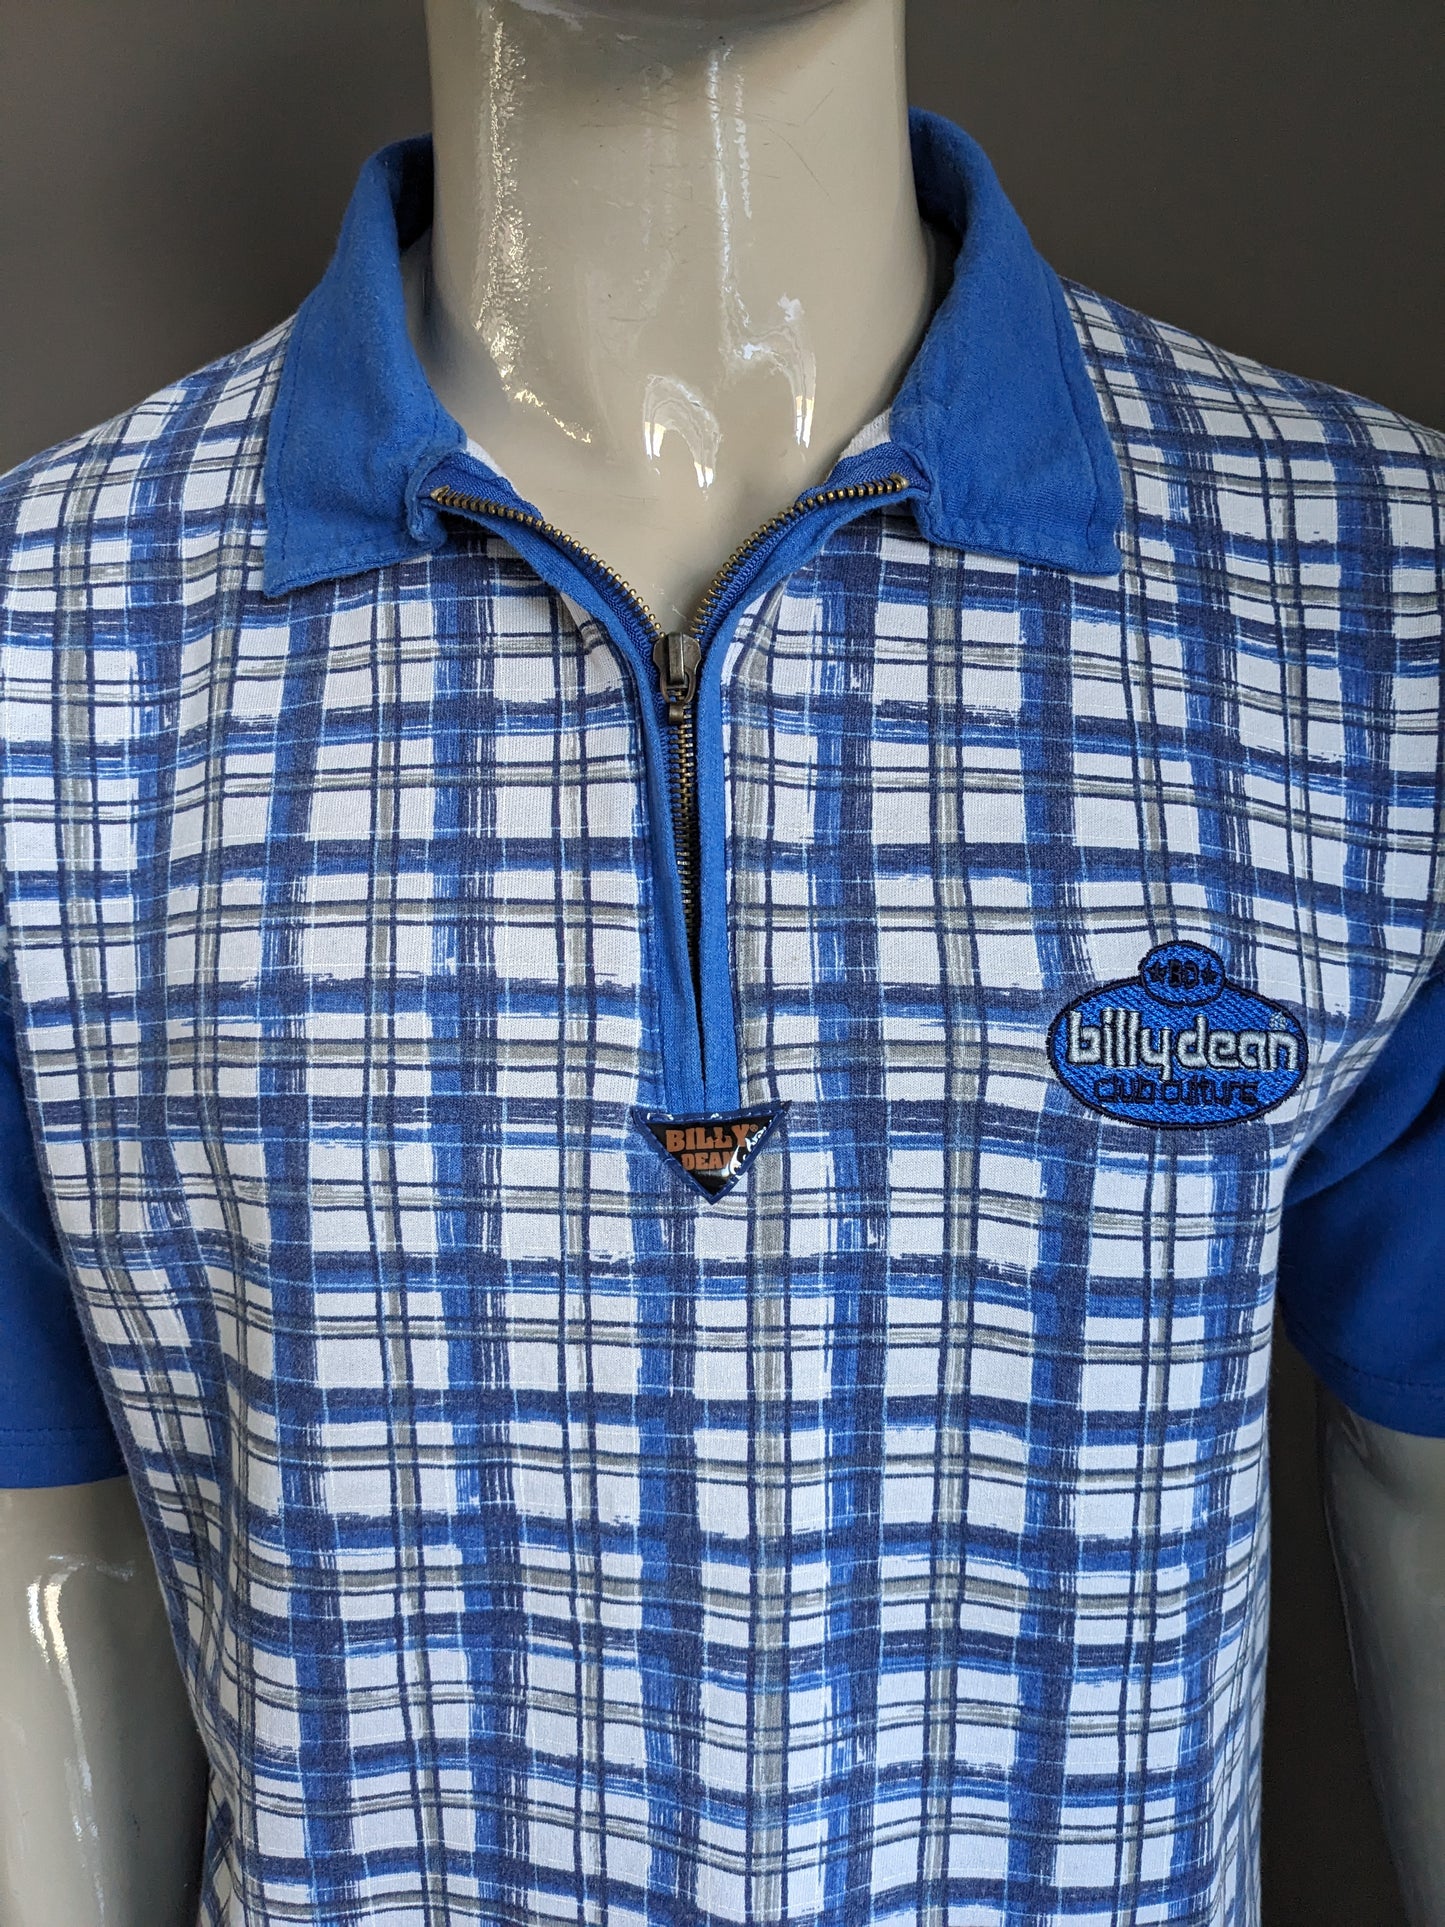 Vintage Billy Dean Polo with zipper. Blue white gray checked. Size L.